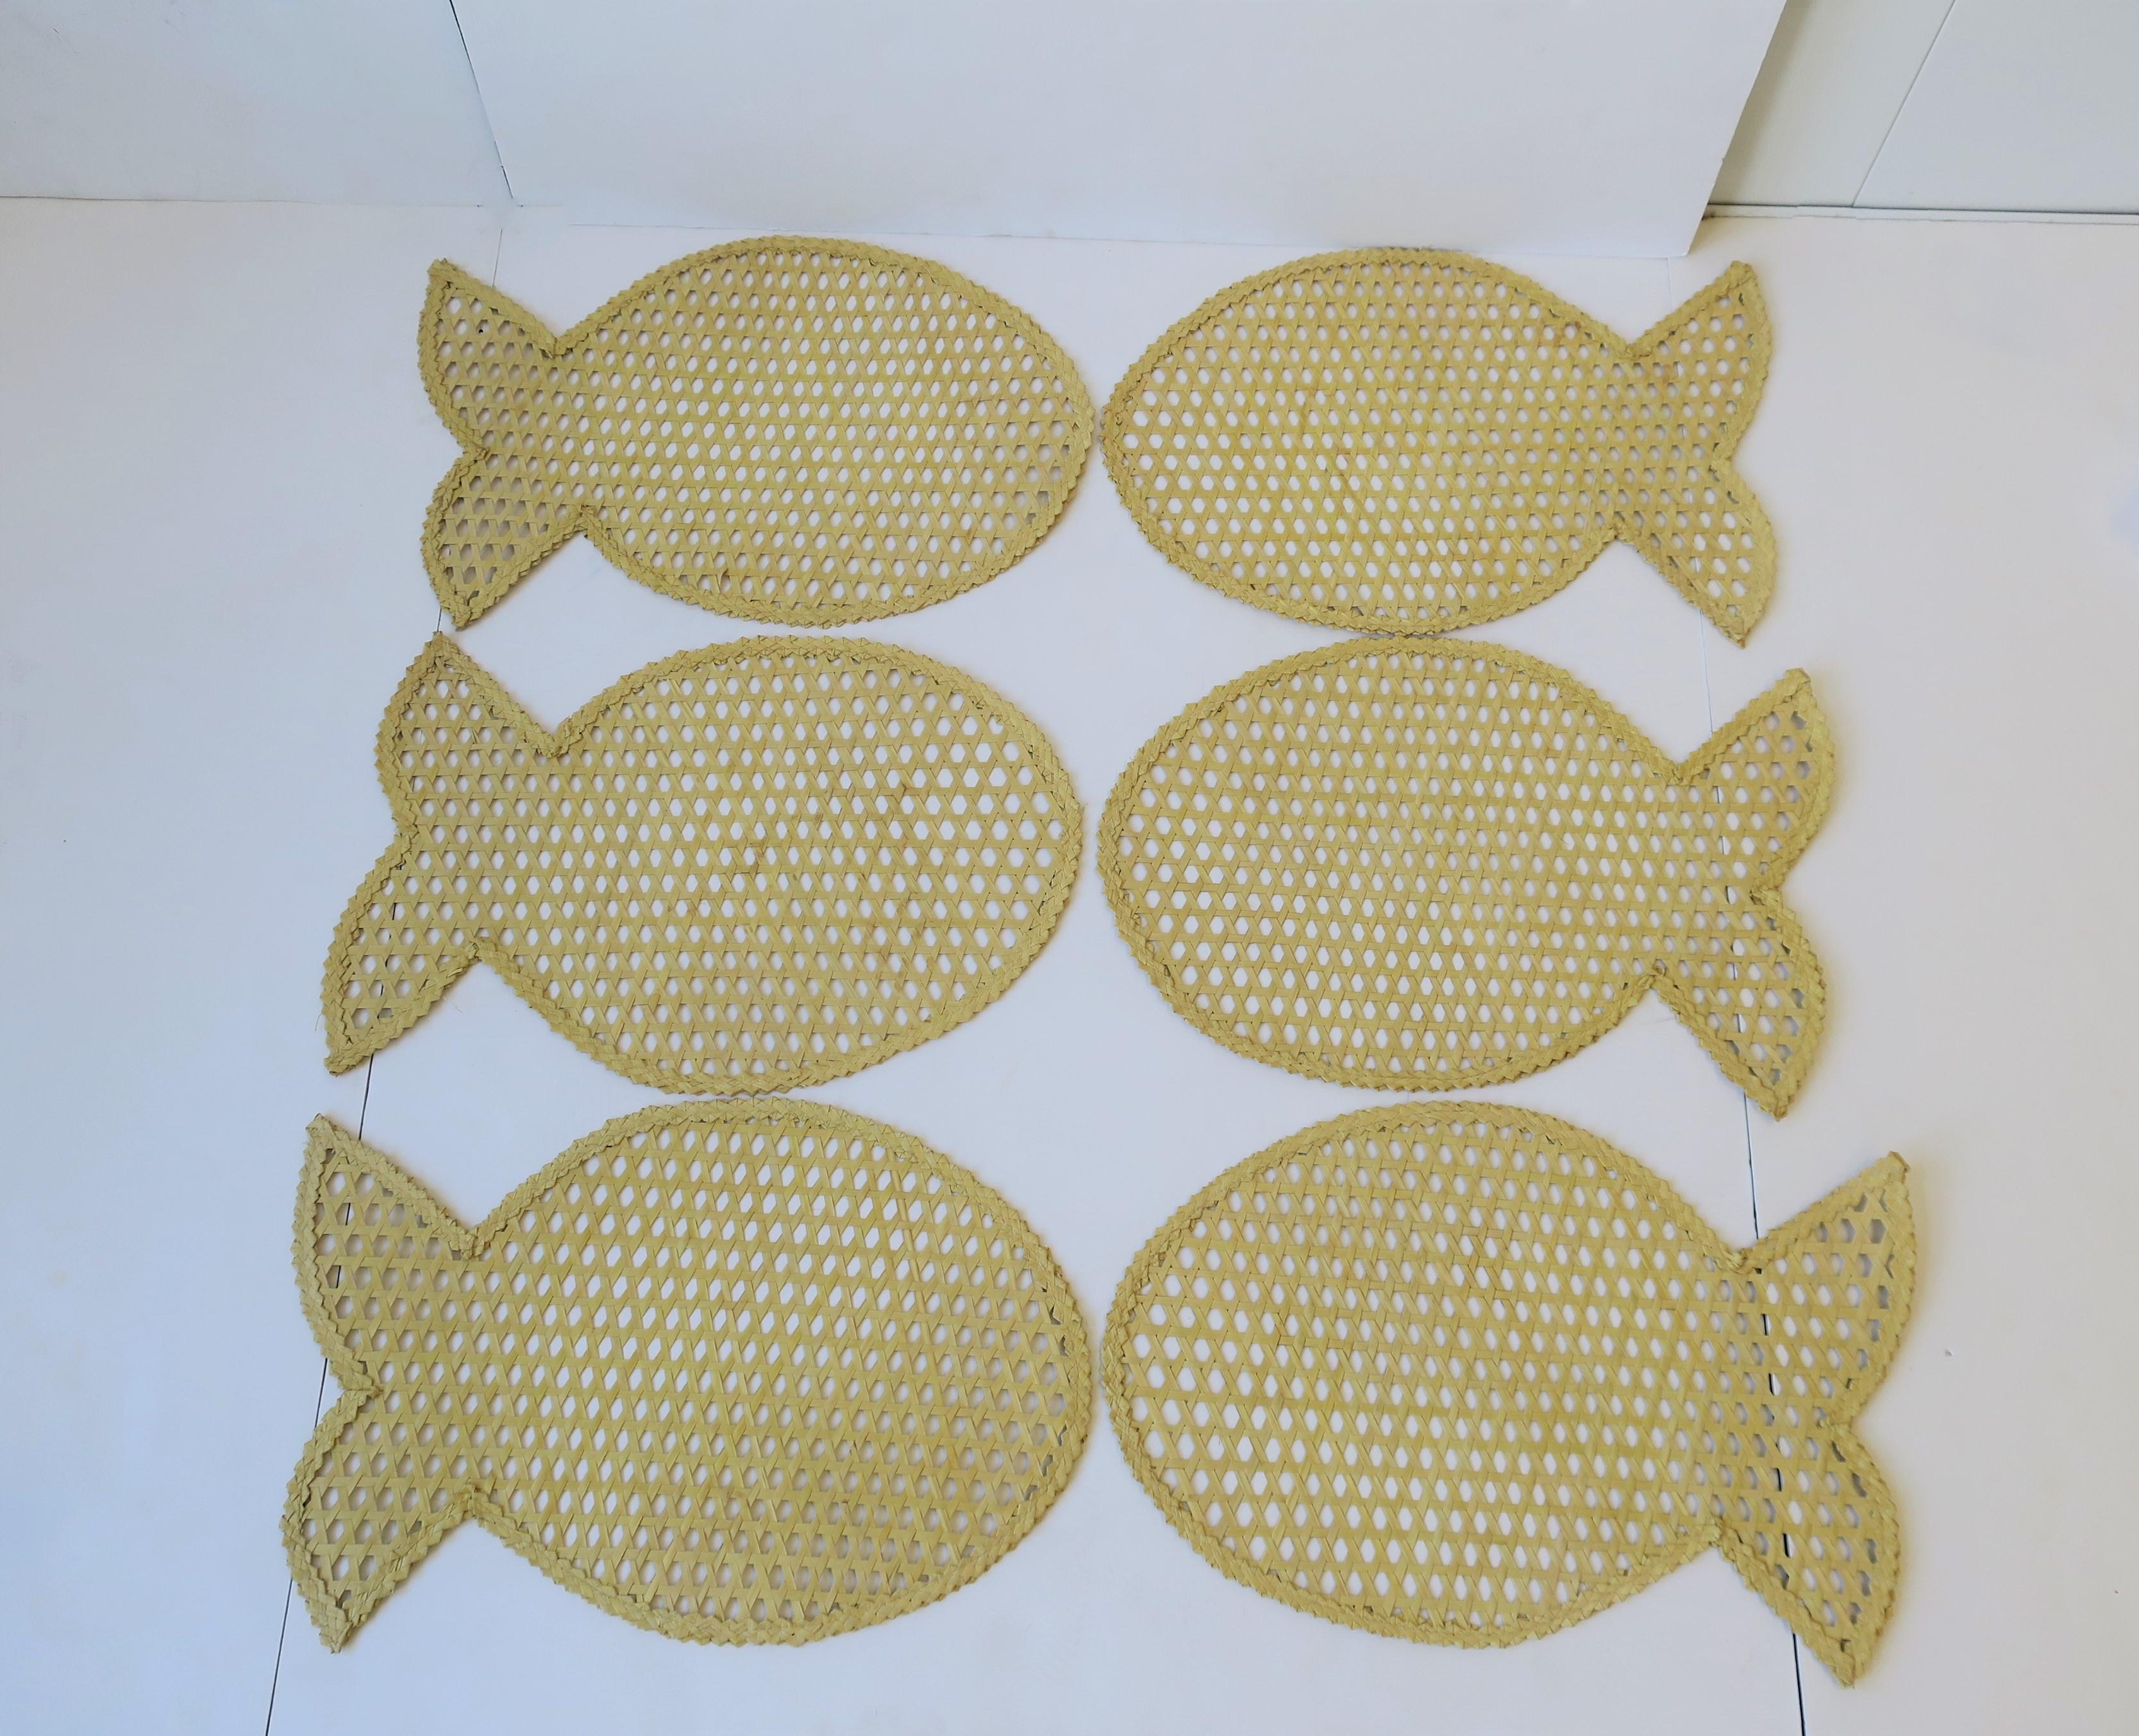 A chic and rare set of 6 wicker 'fish' table placemats, circa 1970s. 

Each placemat measures: 11.25